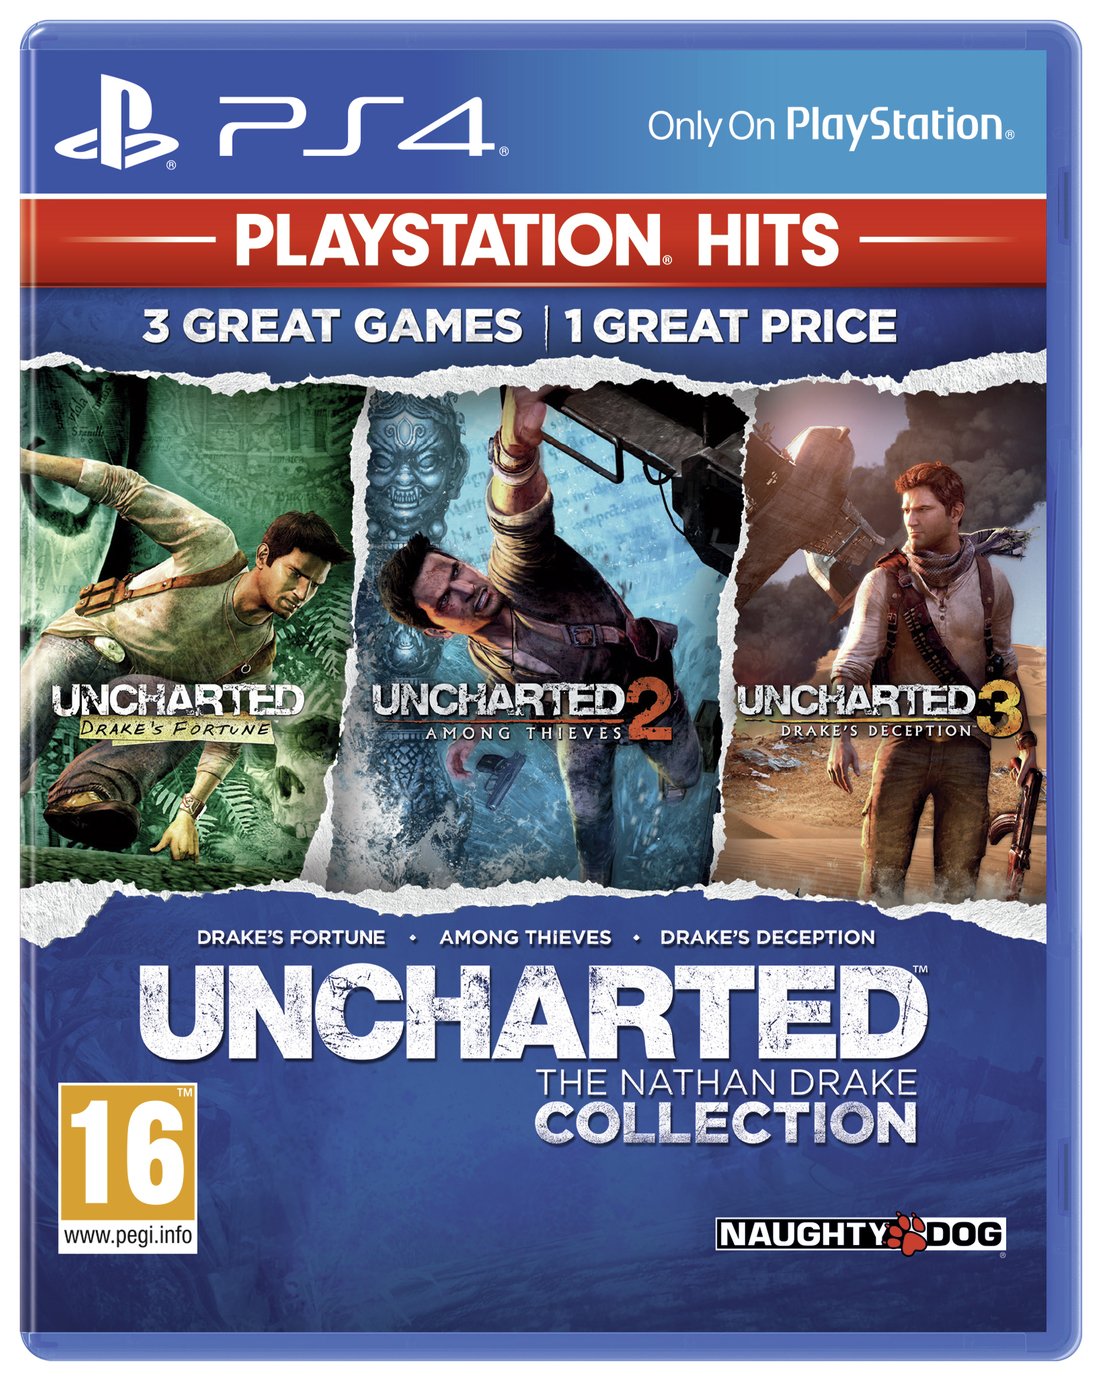 uncharted collection ps4 price